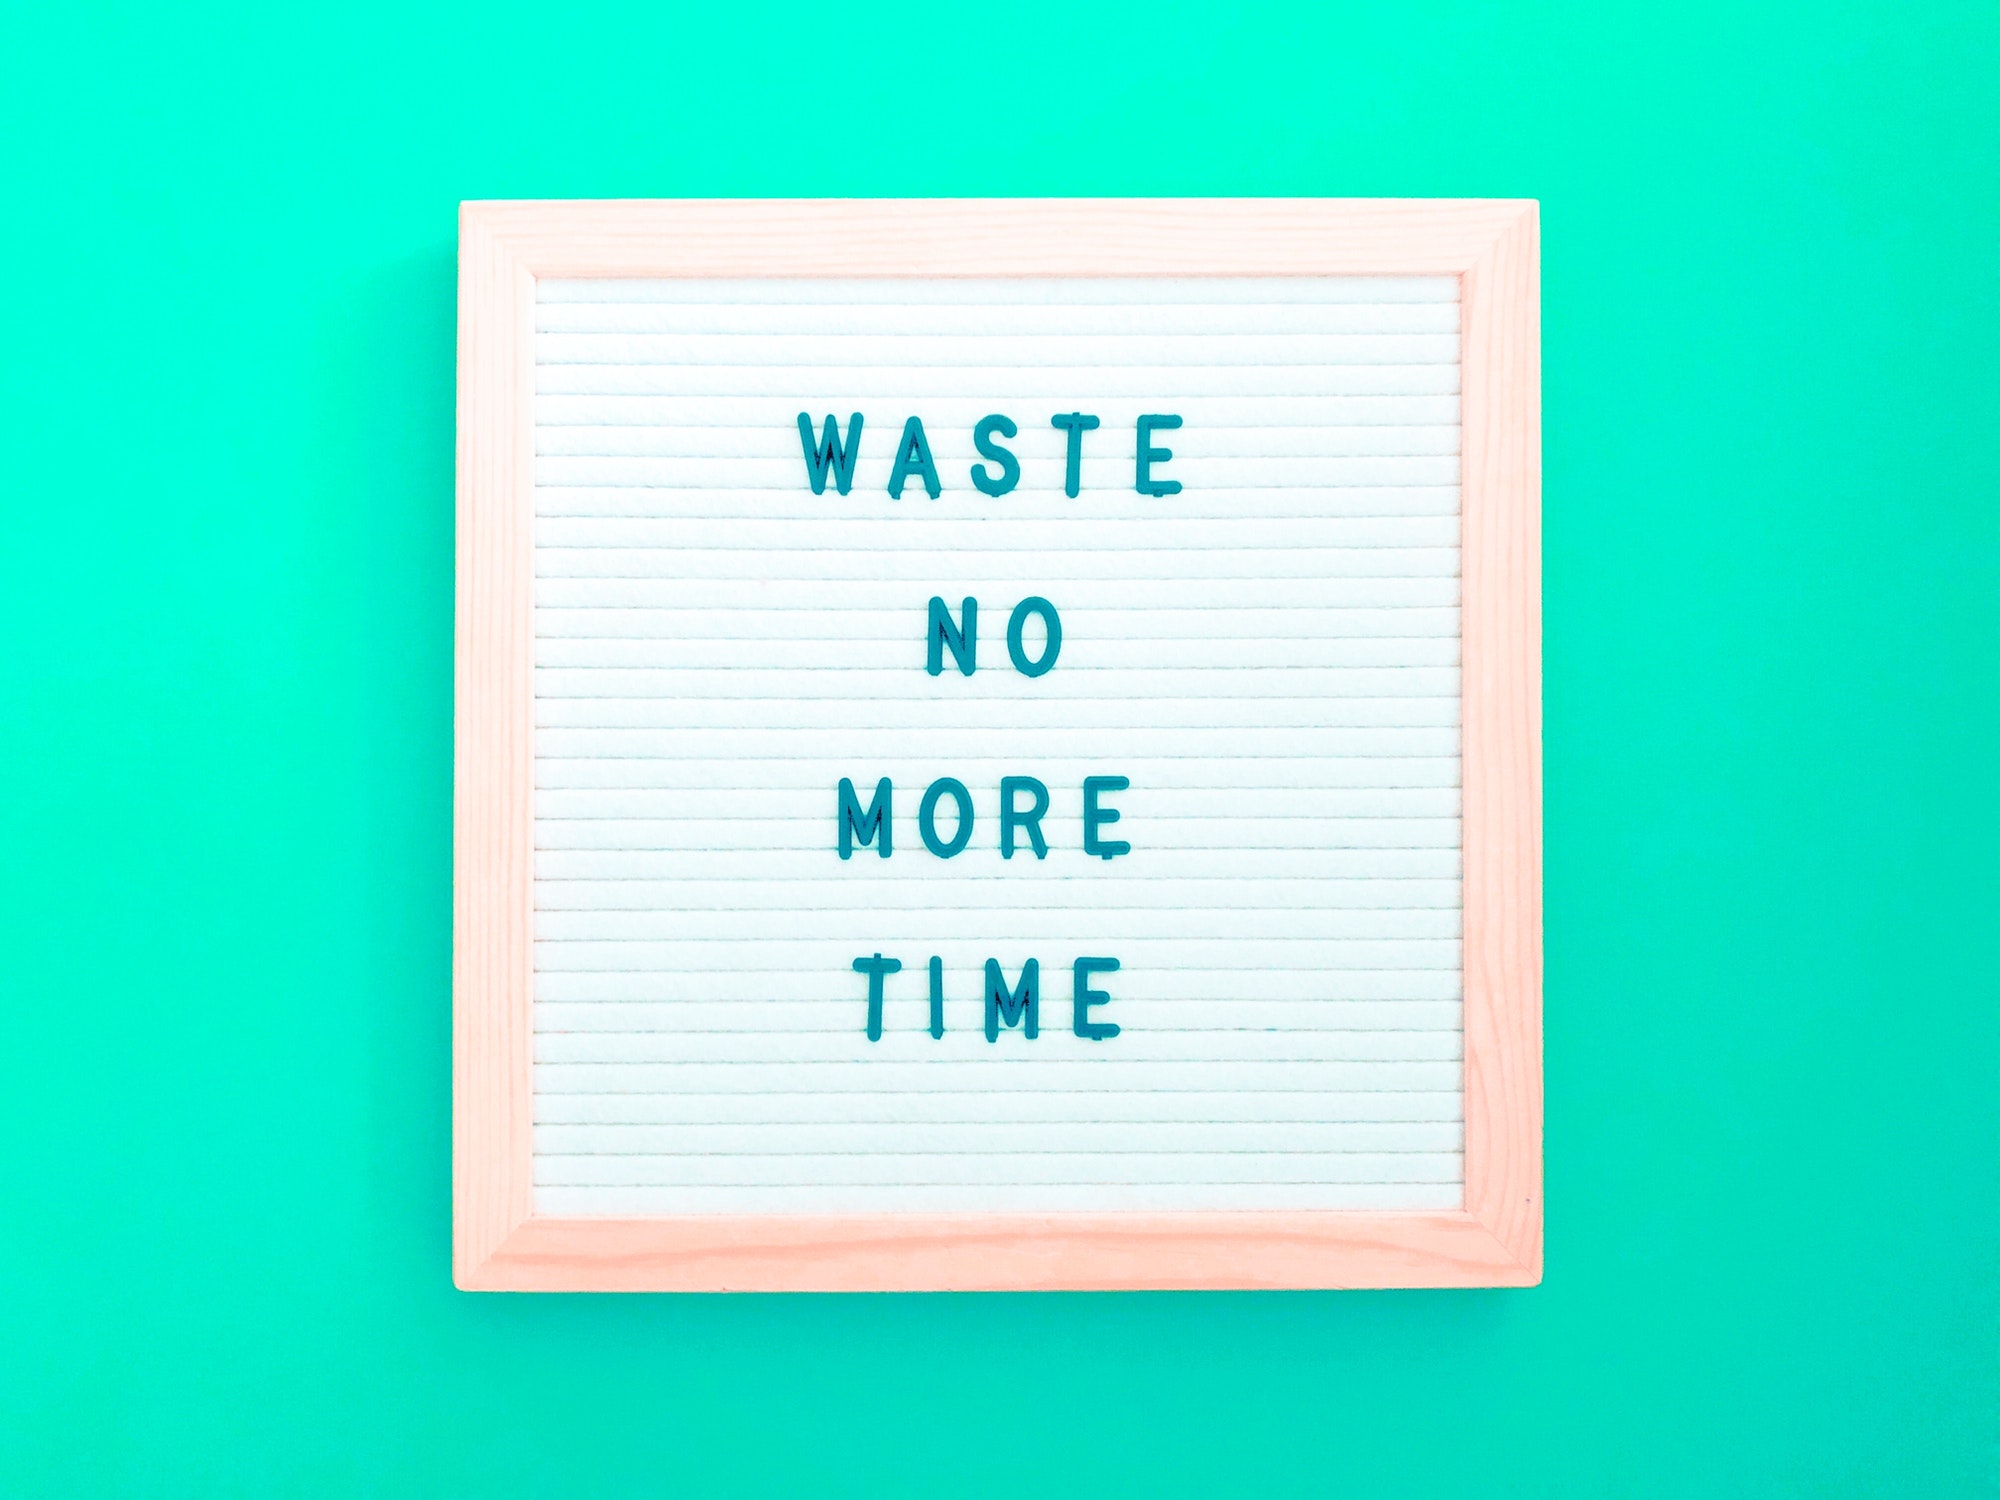 Waste no more time.